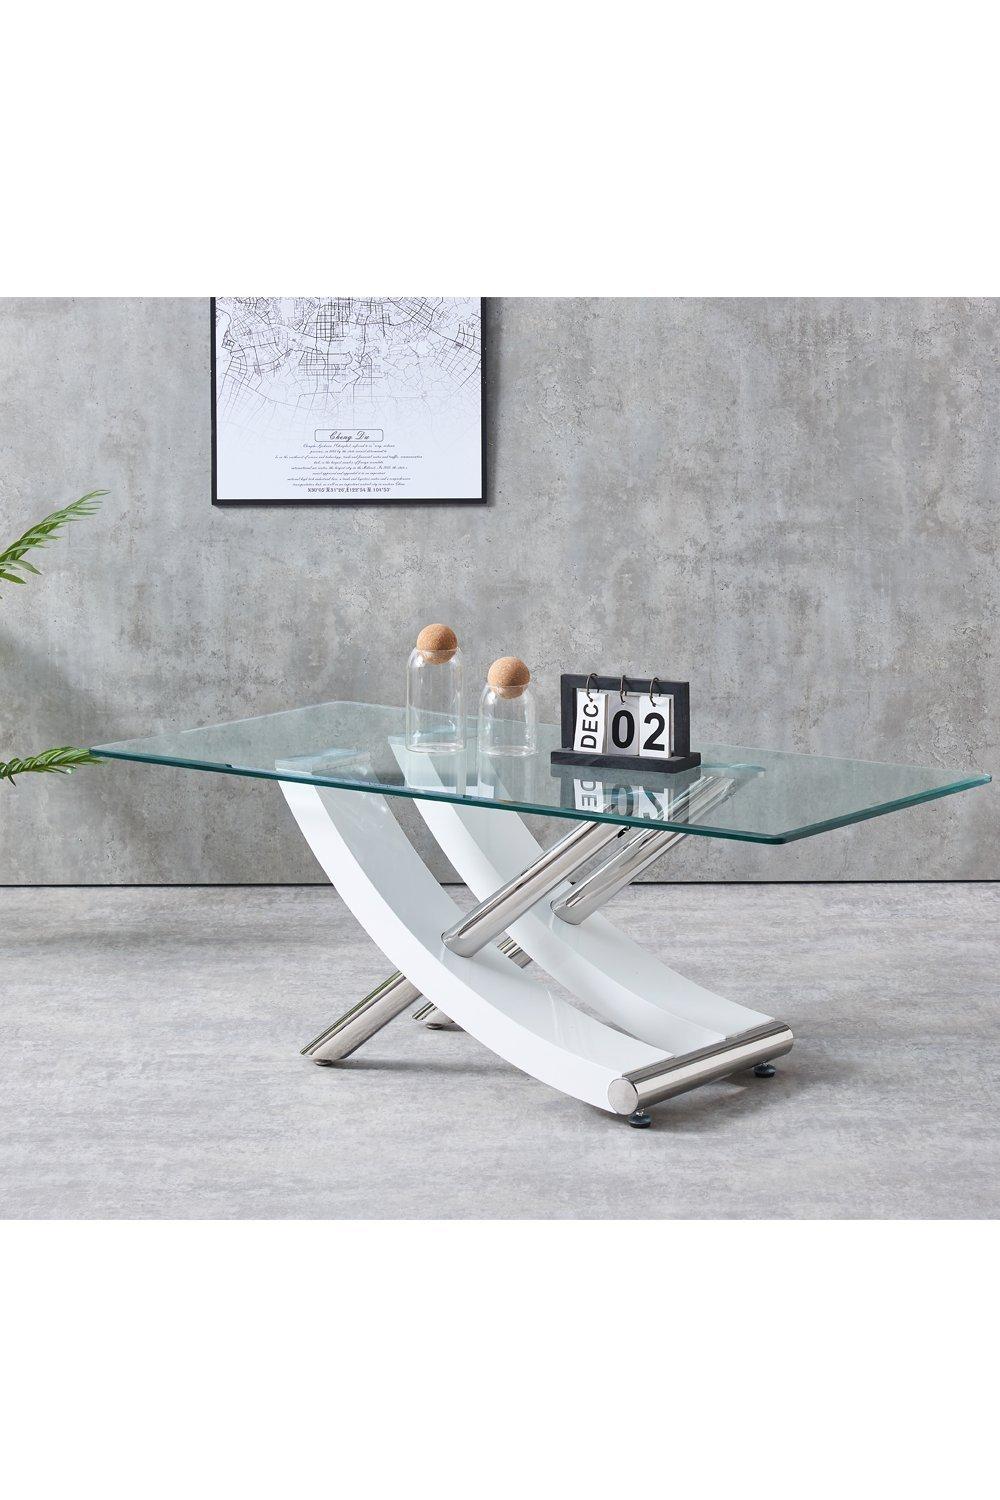 Nuovo Coffee Table, Tempered Clear Glass Top With Cross Leg